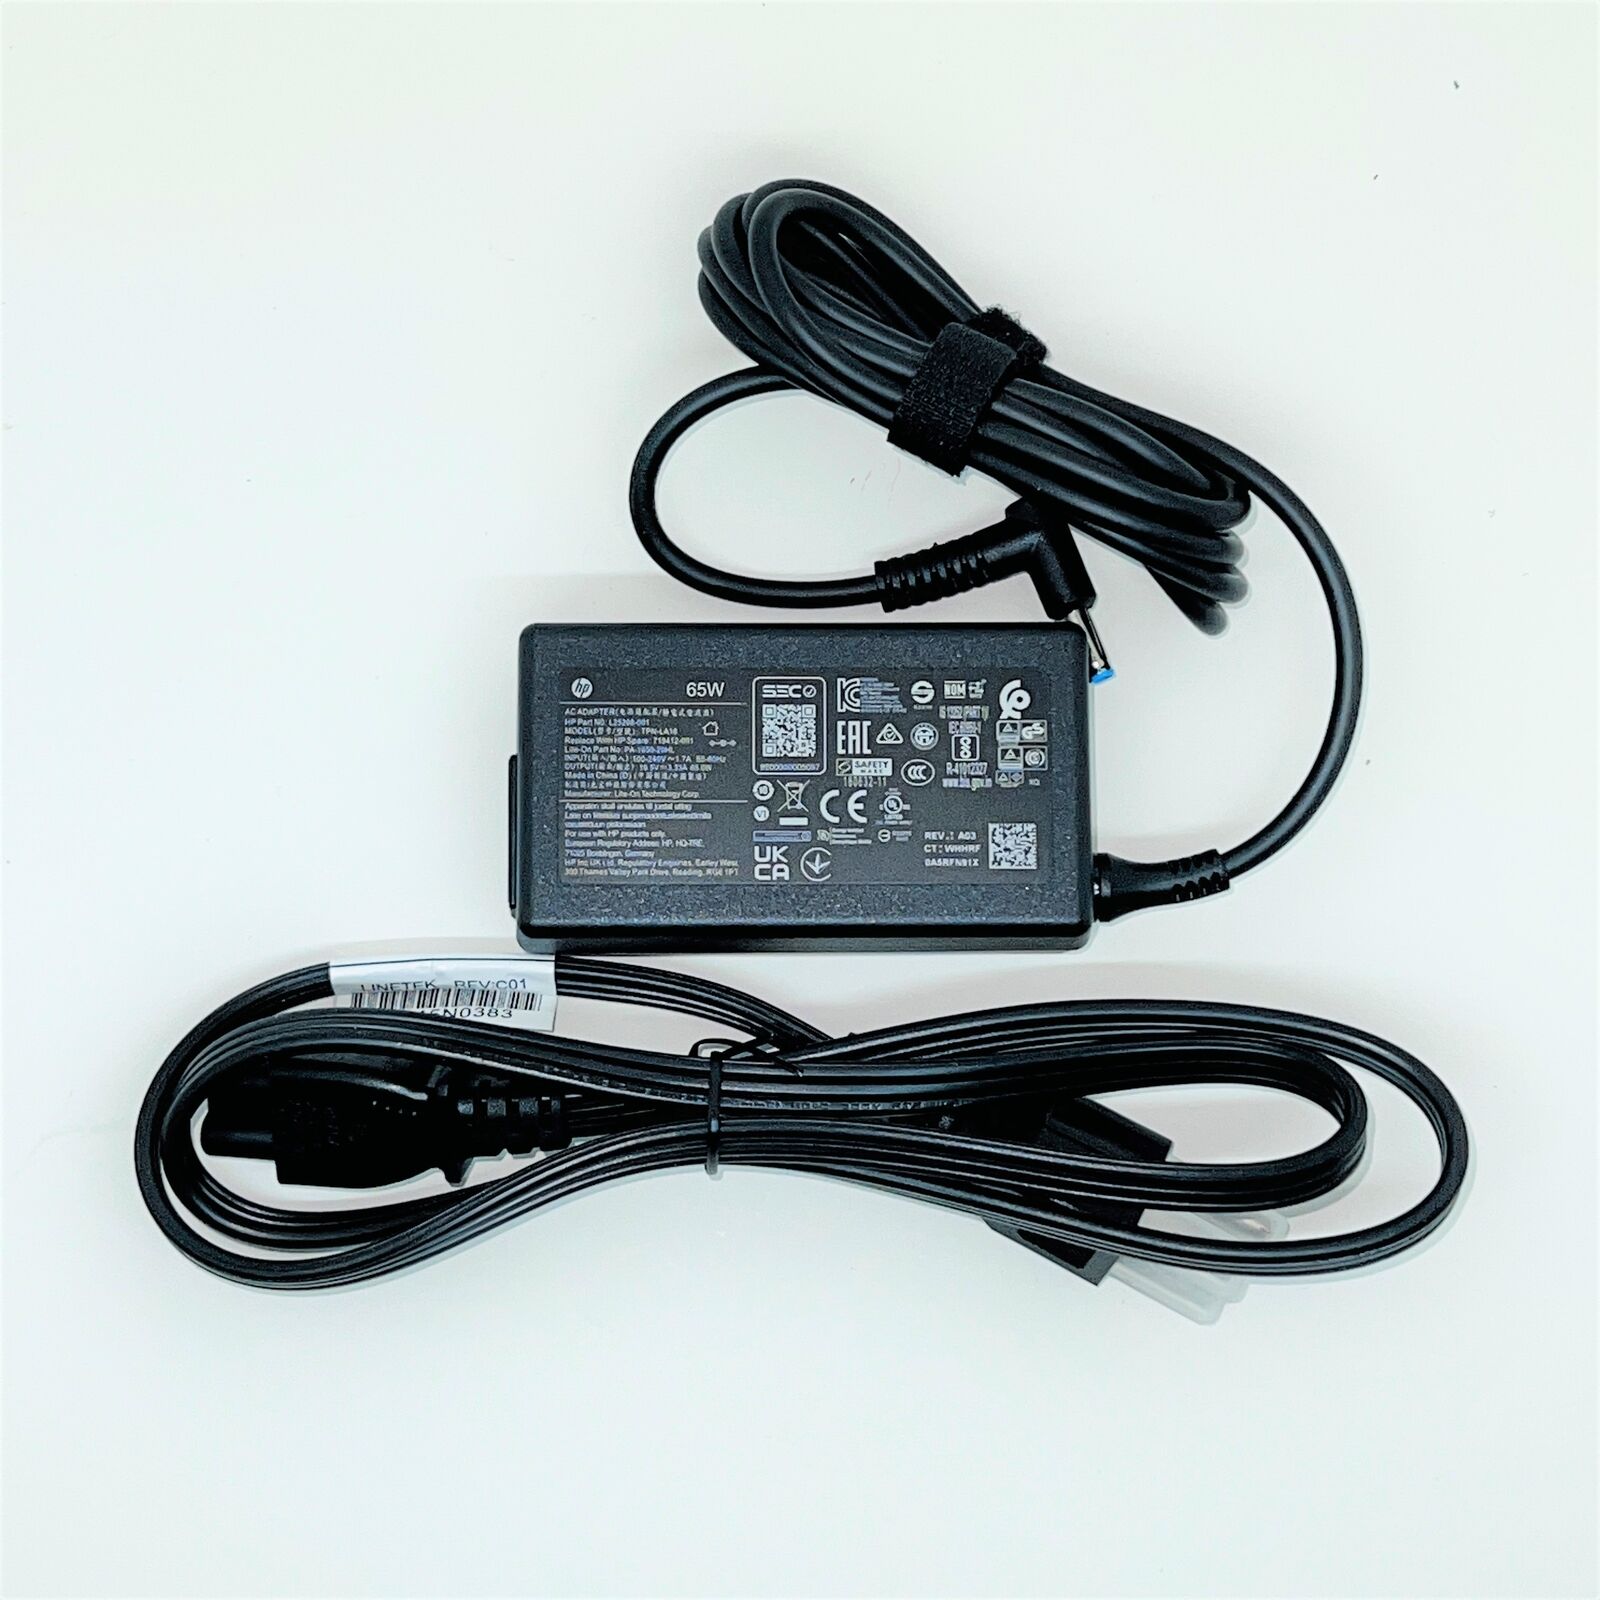 NEW Genuine OEM Power Charger for HP ProBook 650 G2, 655 G2, 640 G2, 645 G2 